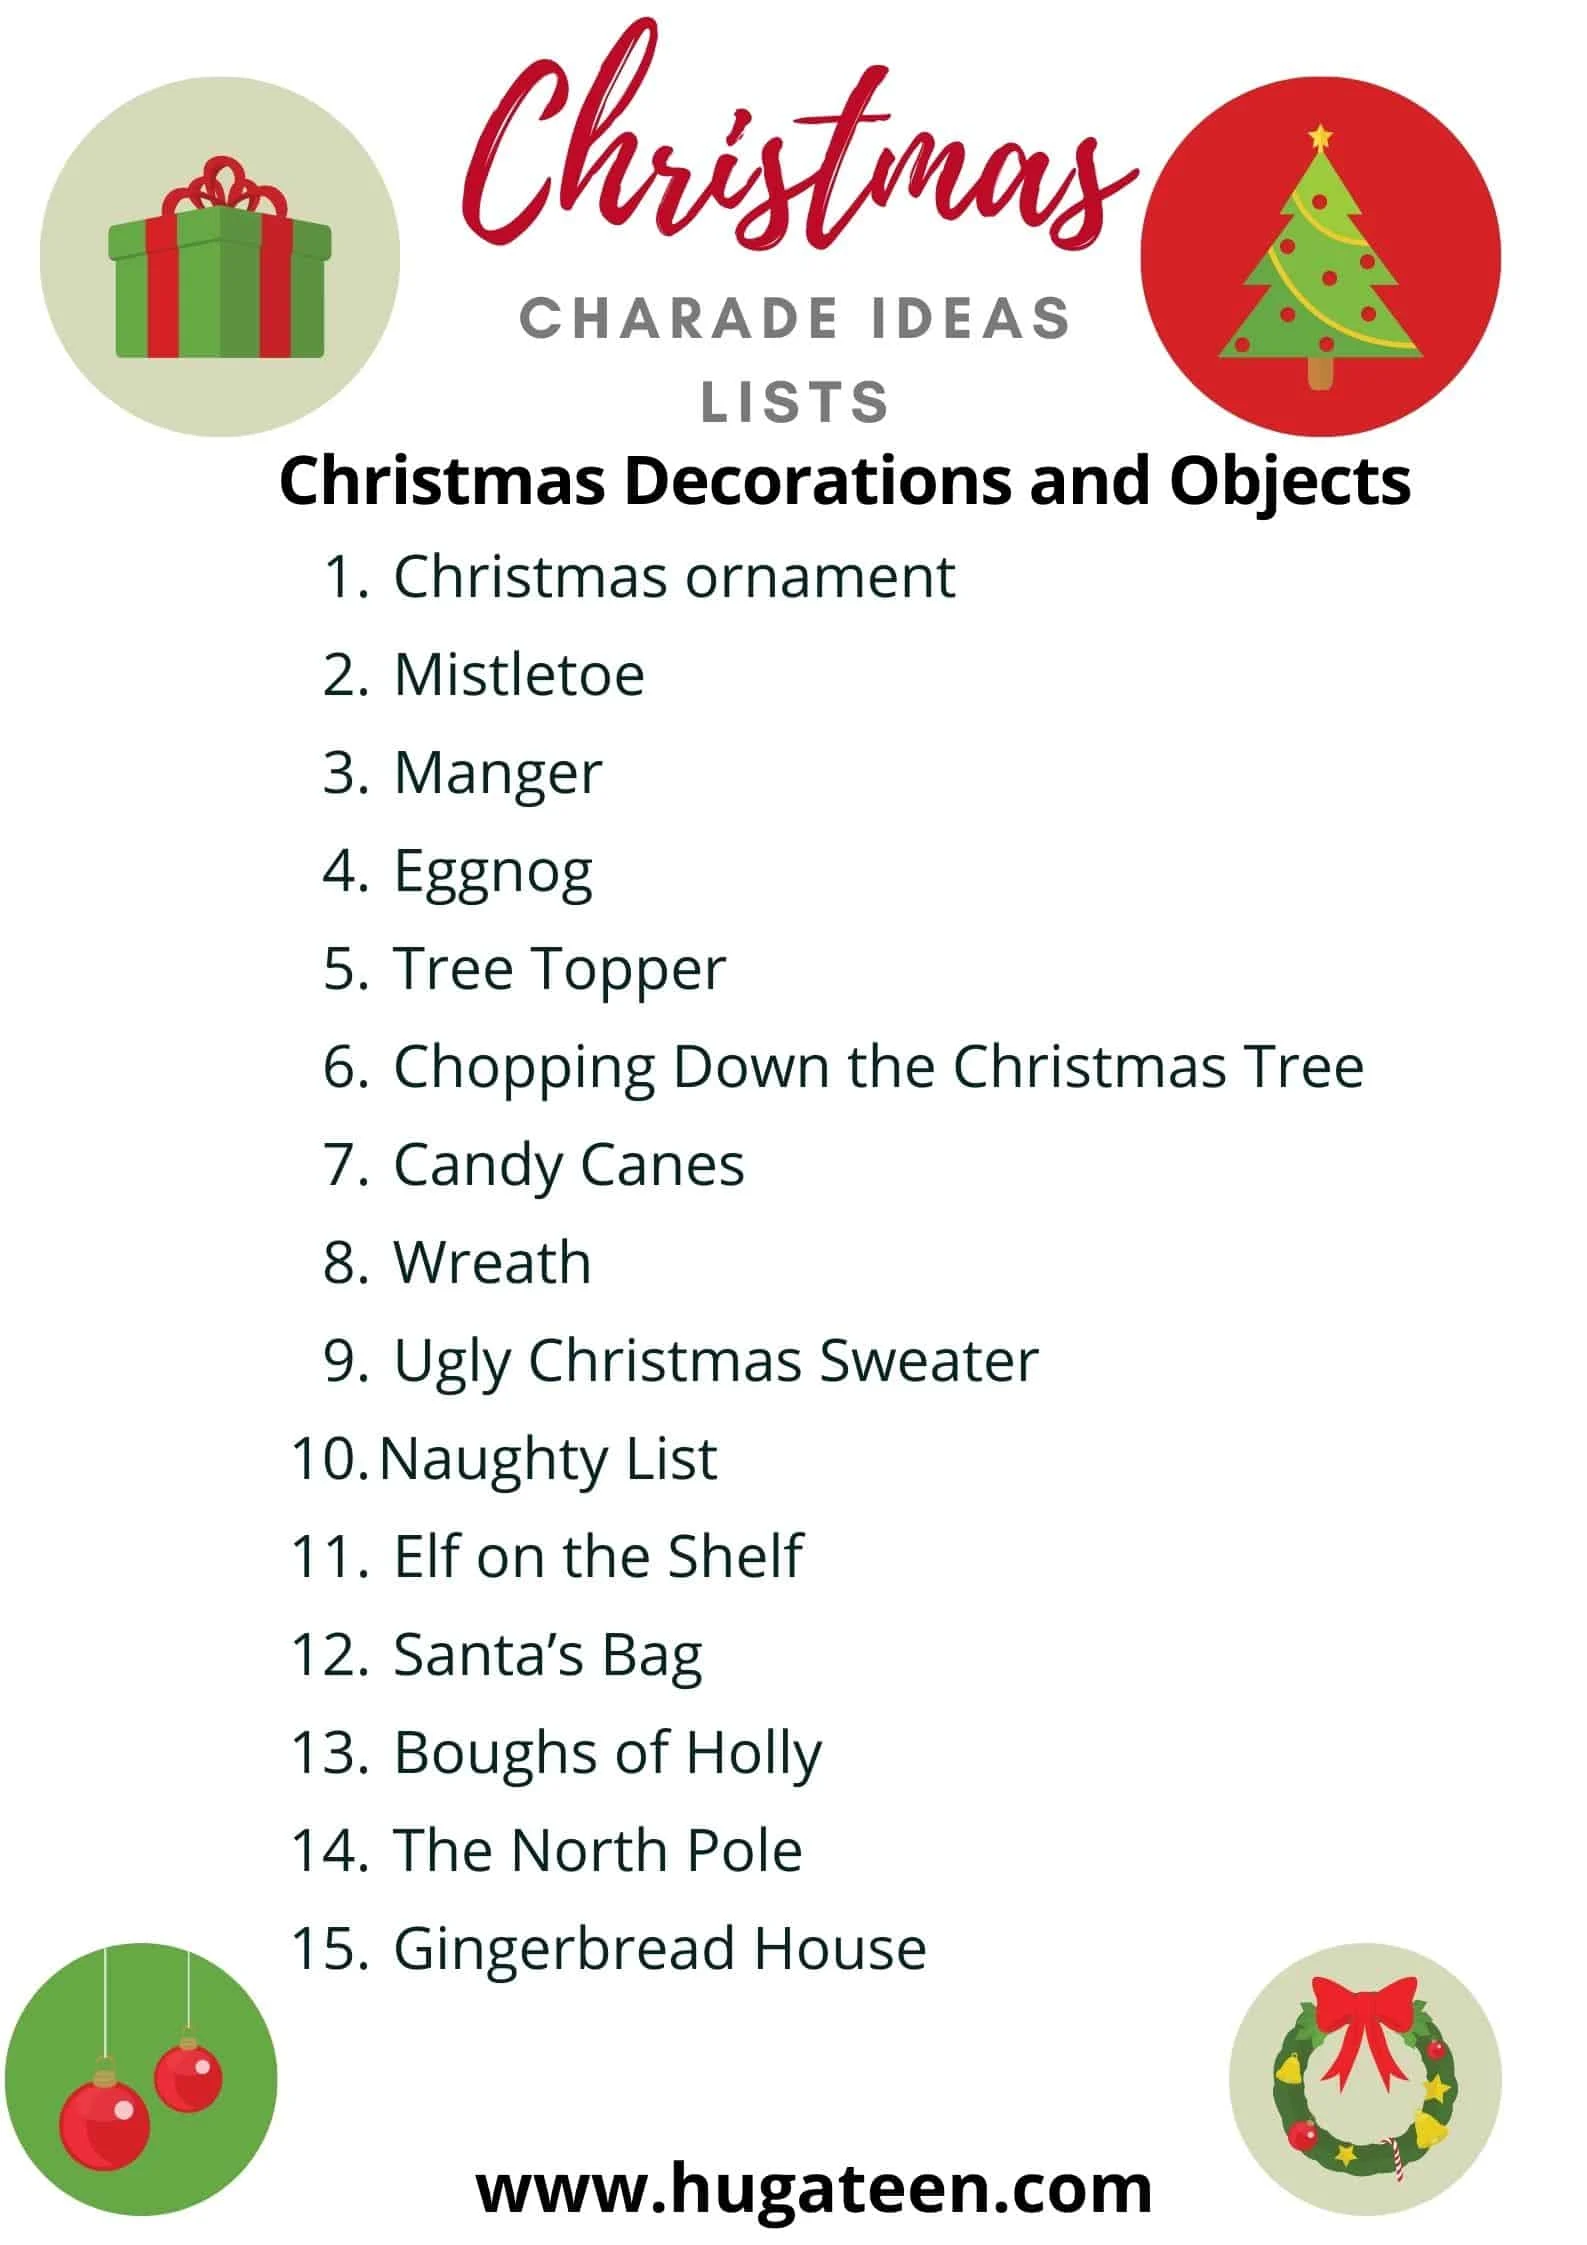 Christmas Decorations and Objects